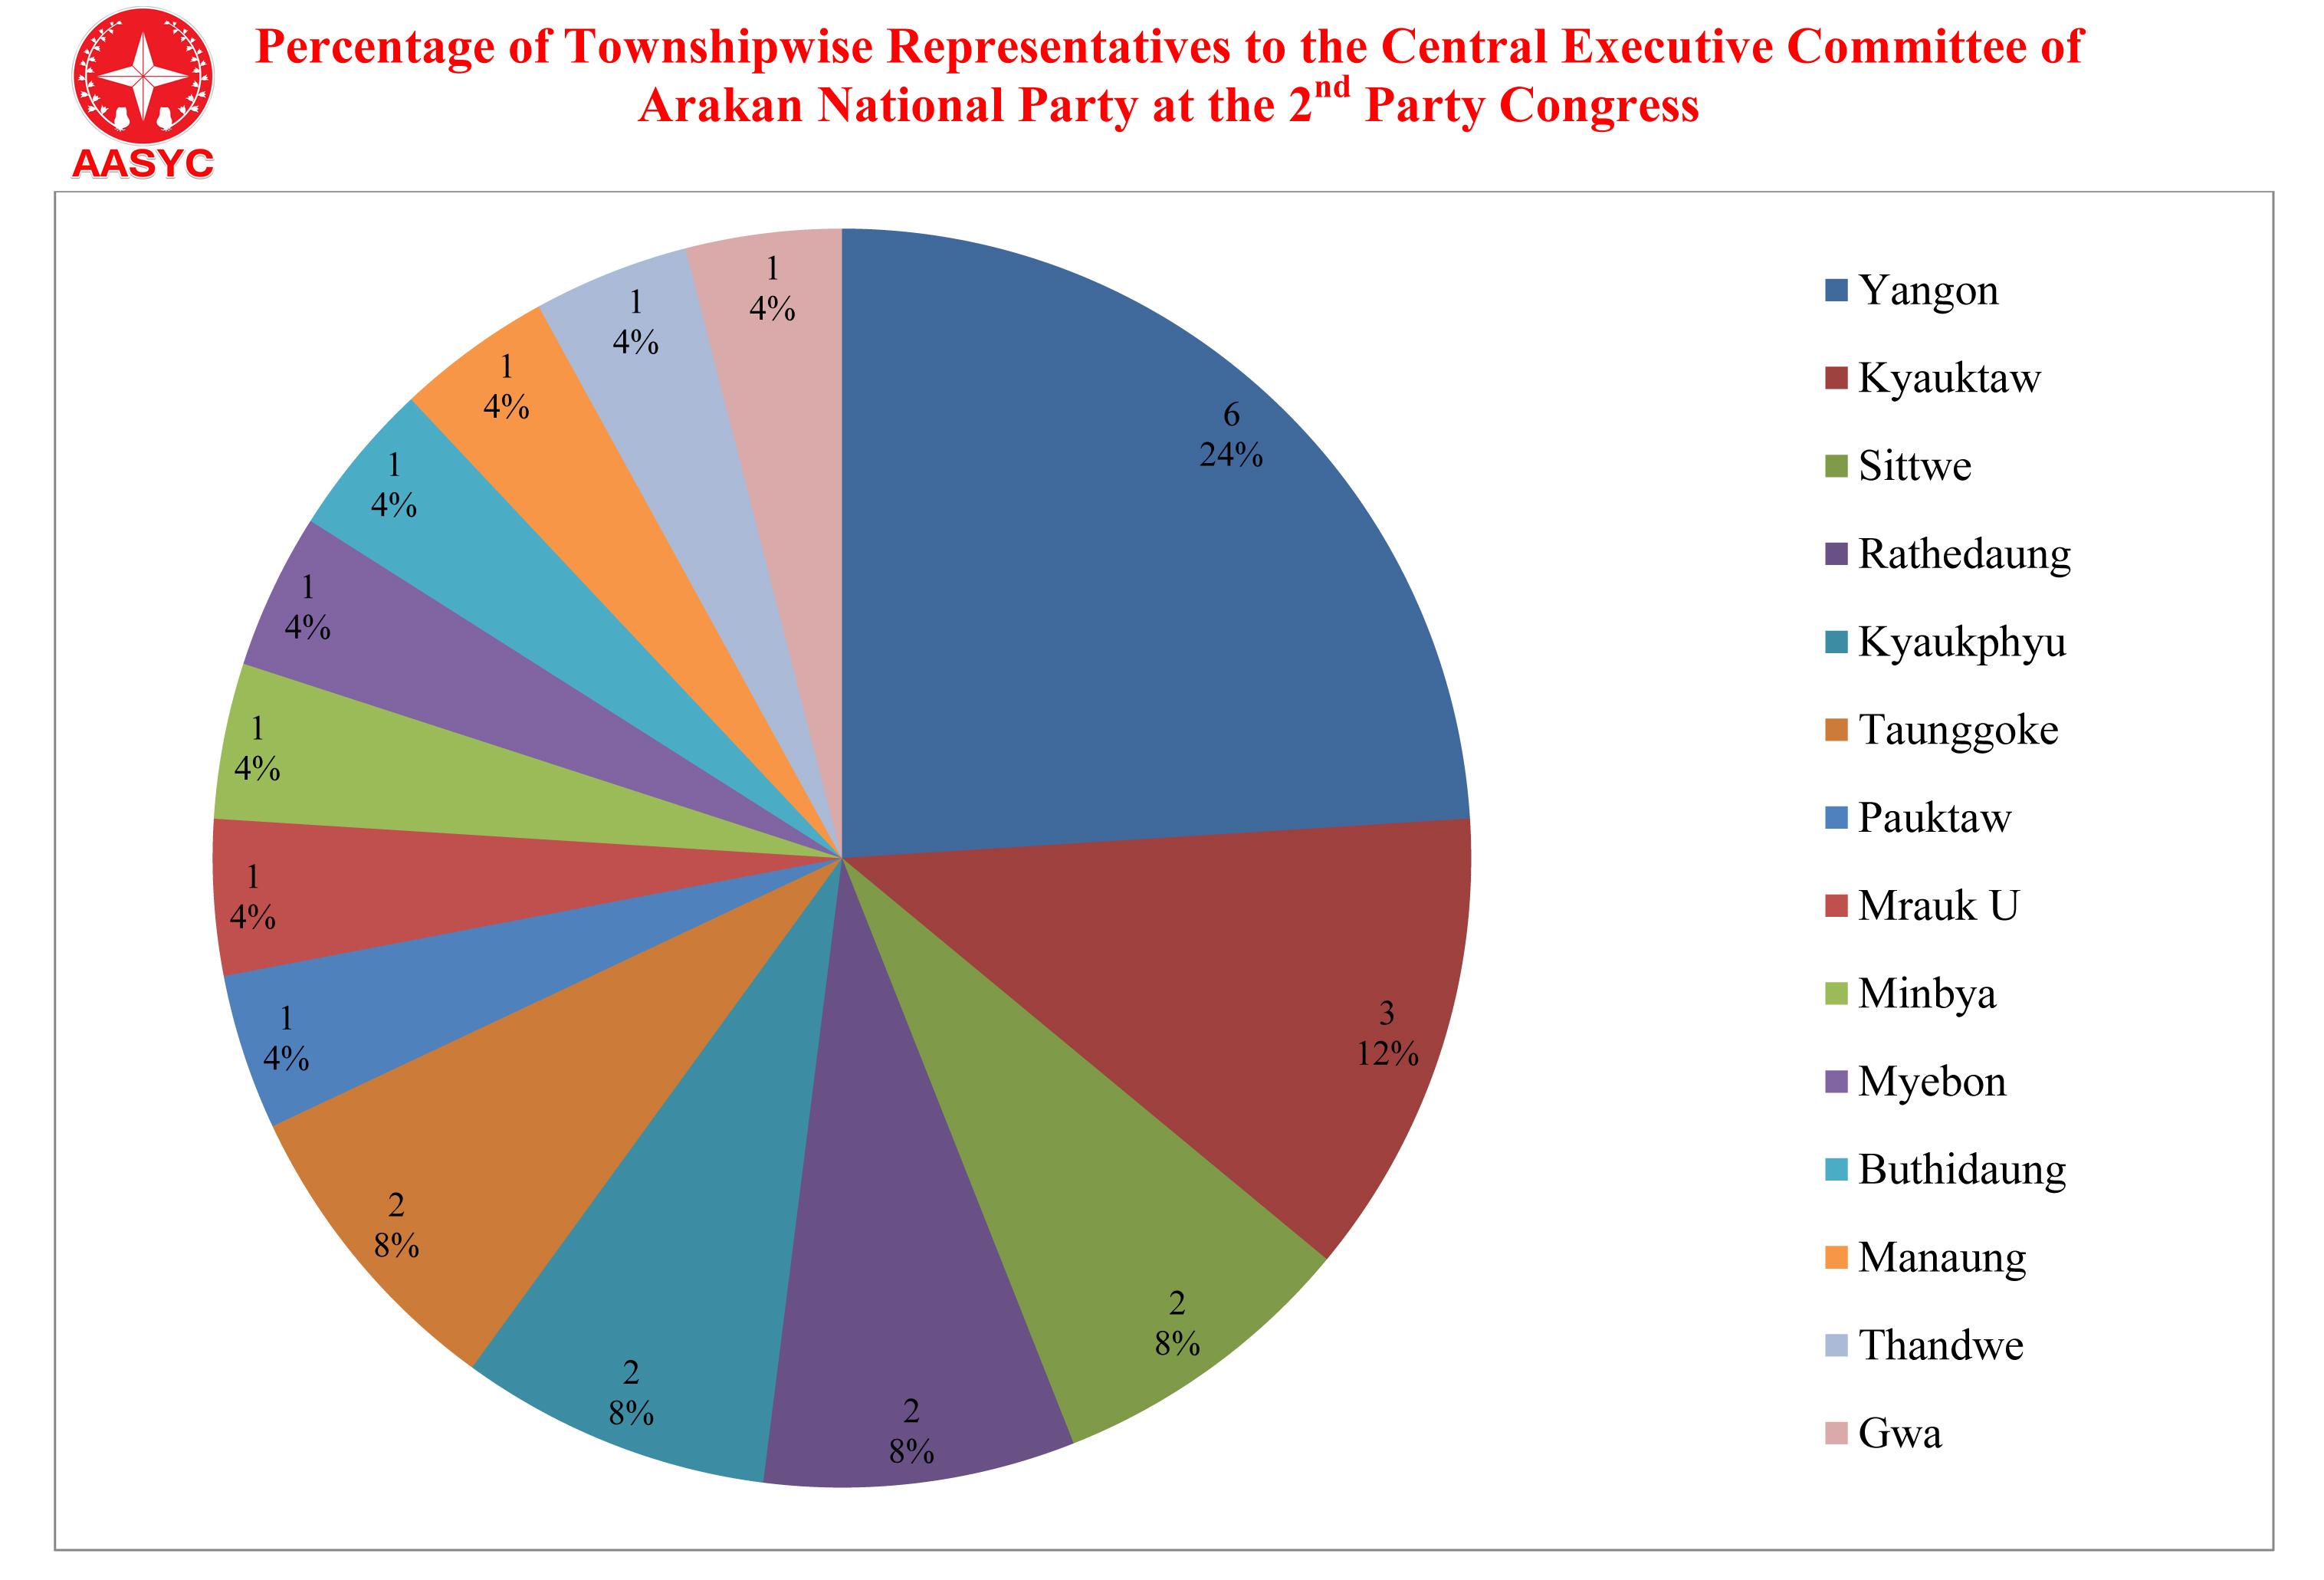 Percentage of Township wise Representative to the Central Executive Committee of Arakan National Party at the 2nd Party’s Congress